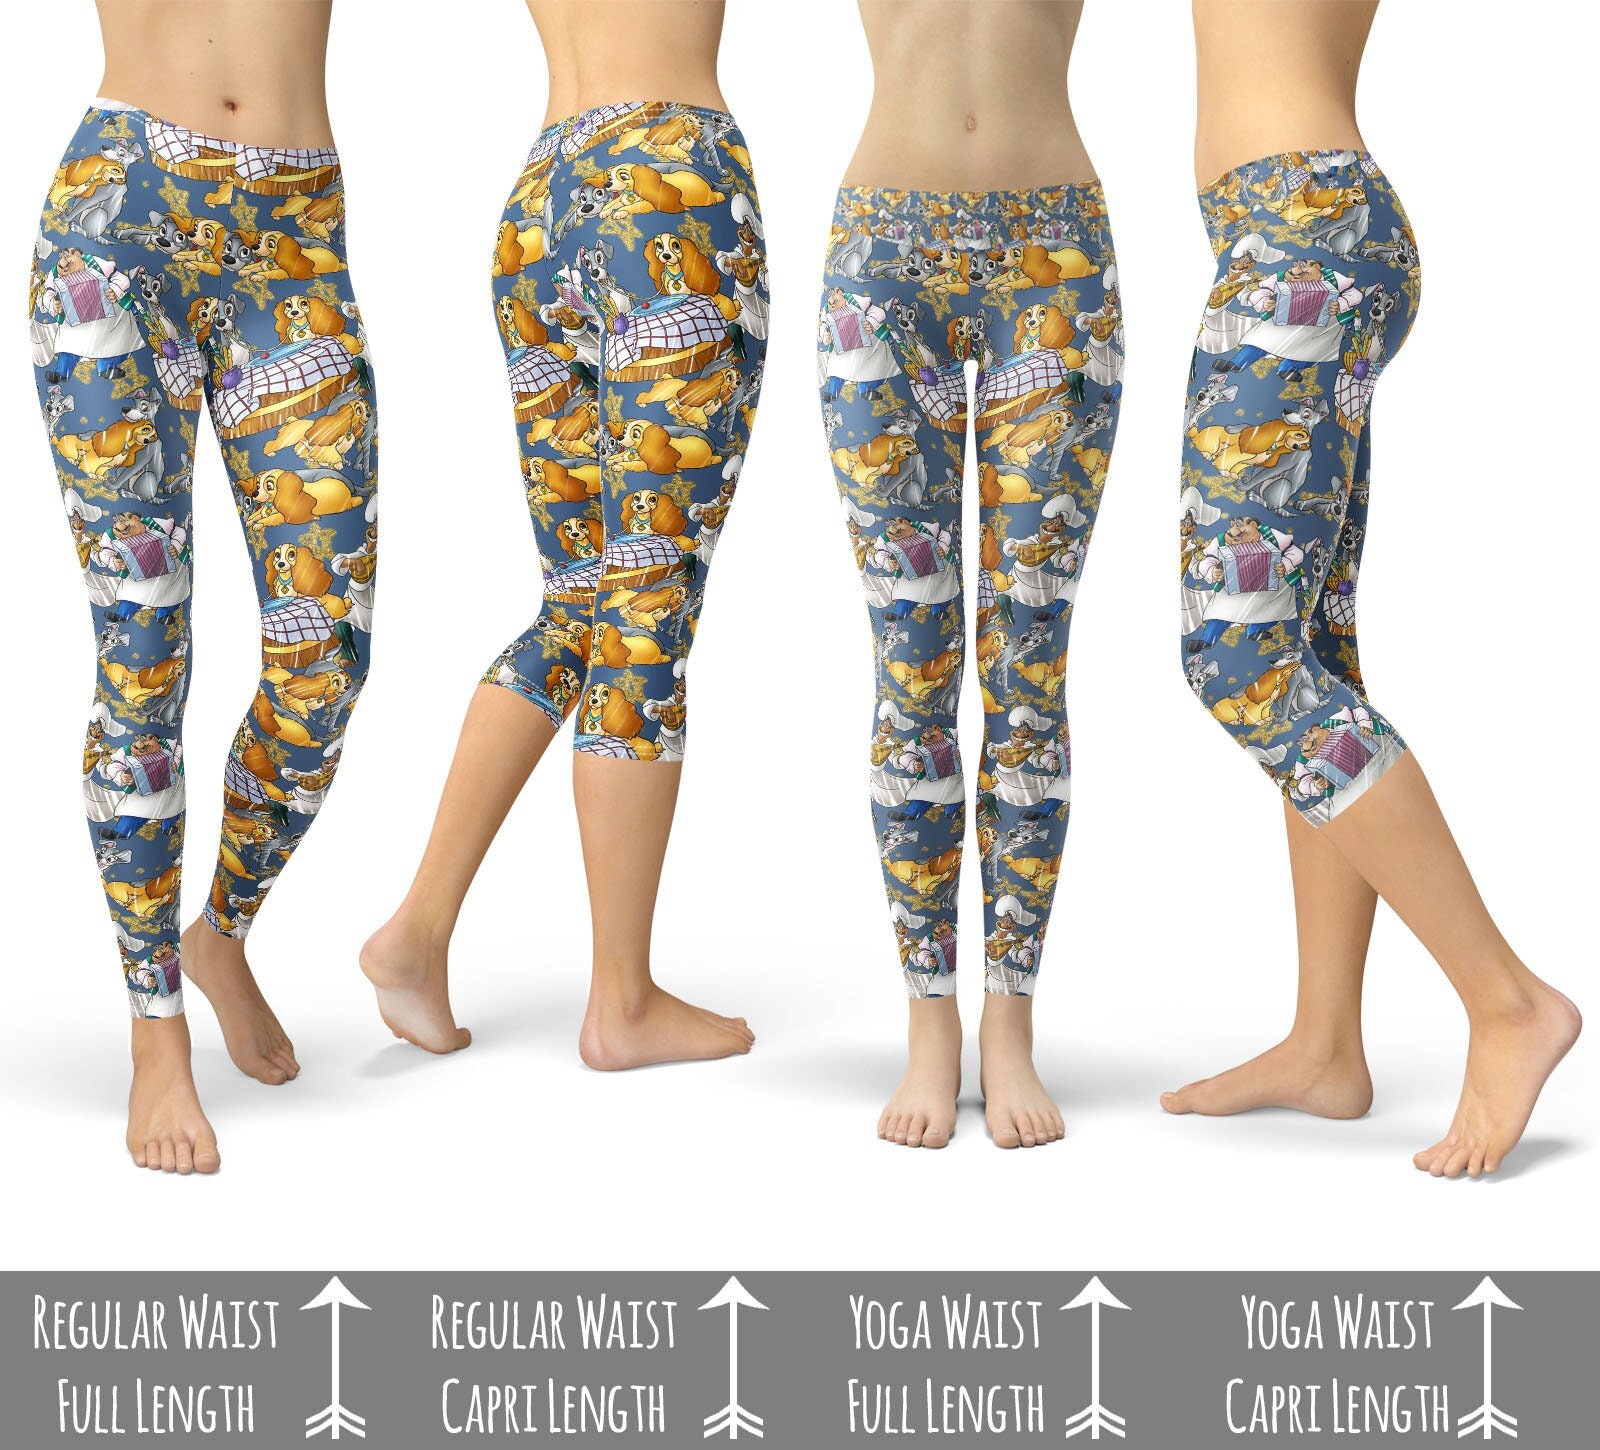 Lady & the Tramp Sketched Theme Park Inspired Leggings in Capri or Full  Length, Sports Yoga Winter Styles in Sizes XS 5XL 